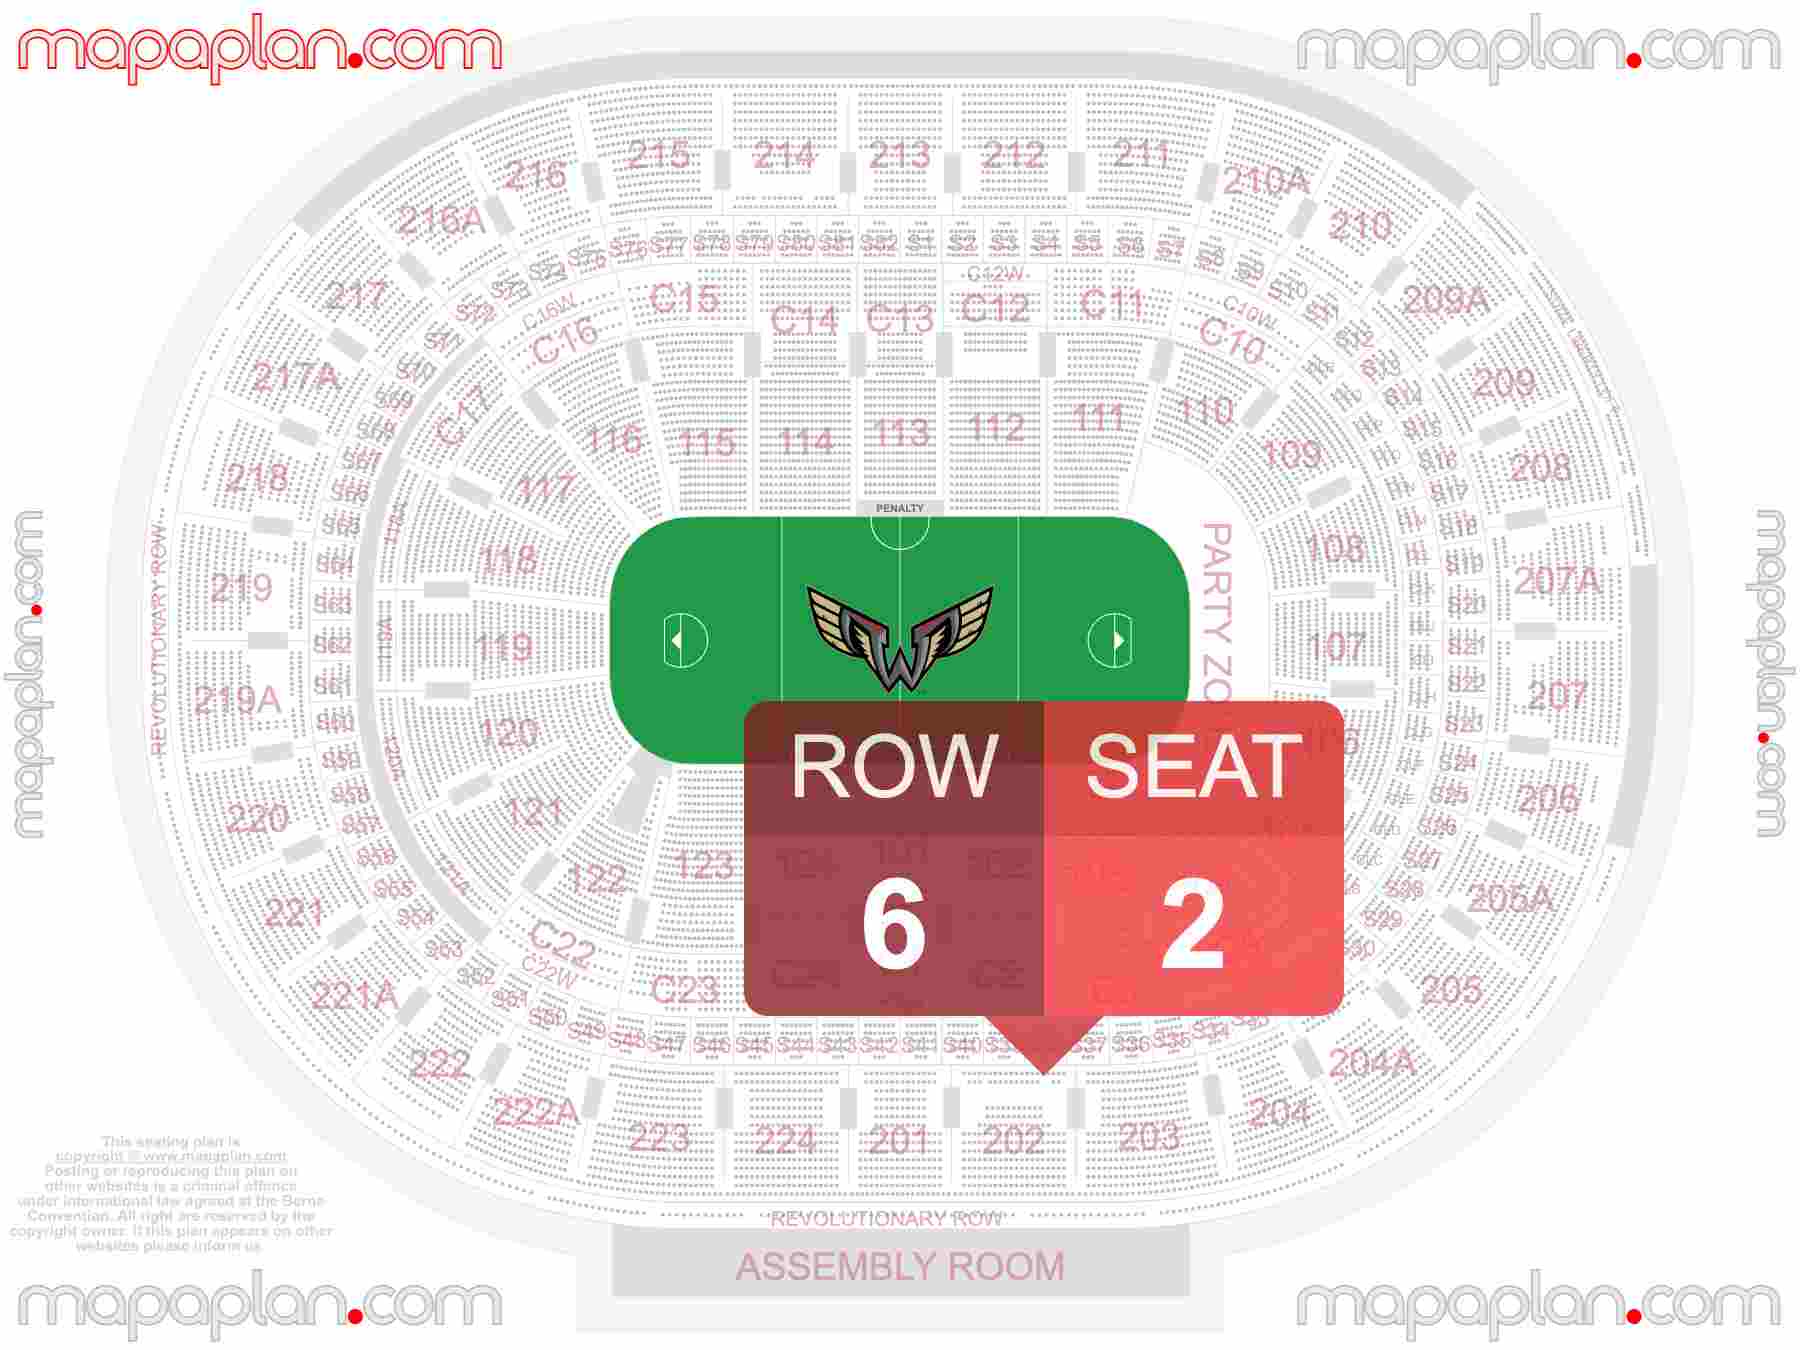 Philadelphia Wells Fargo Center seating chart Philadelphia Wings NLL lacrosse detailed seating chart - 3d virtual seat numbers and row layout